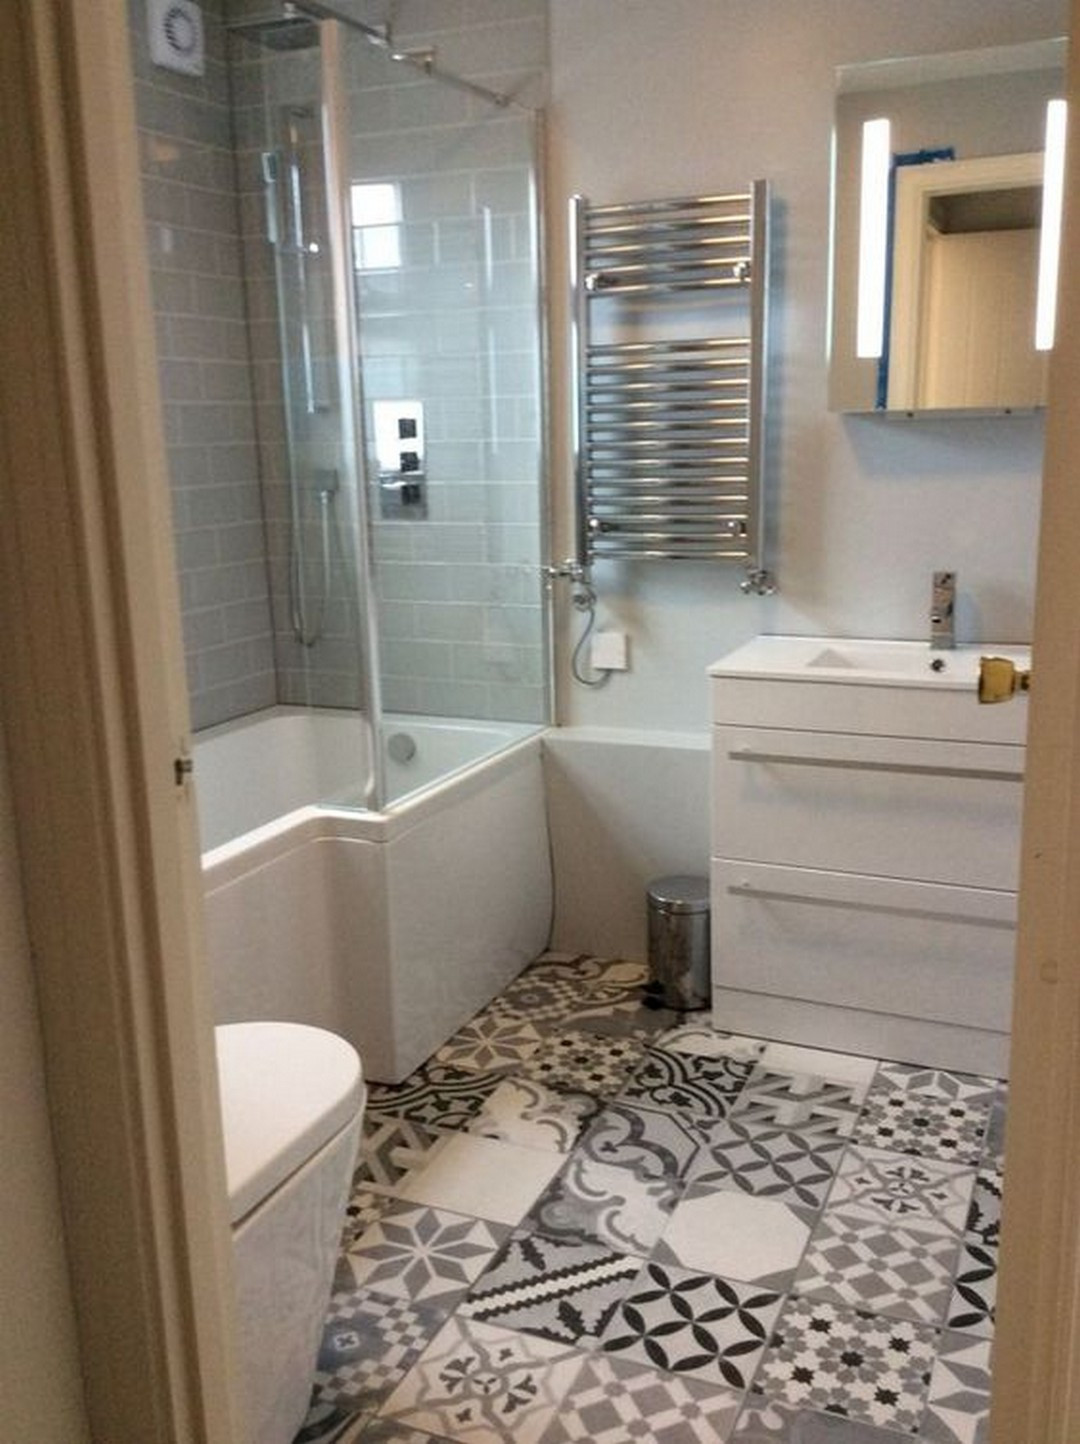 Tile Floors For Bathrooms
 Style up your Ordinary Bathroom with These Spanish Tile